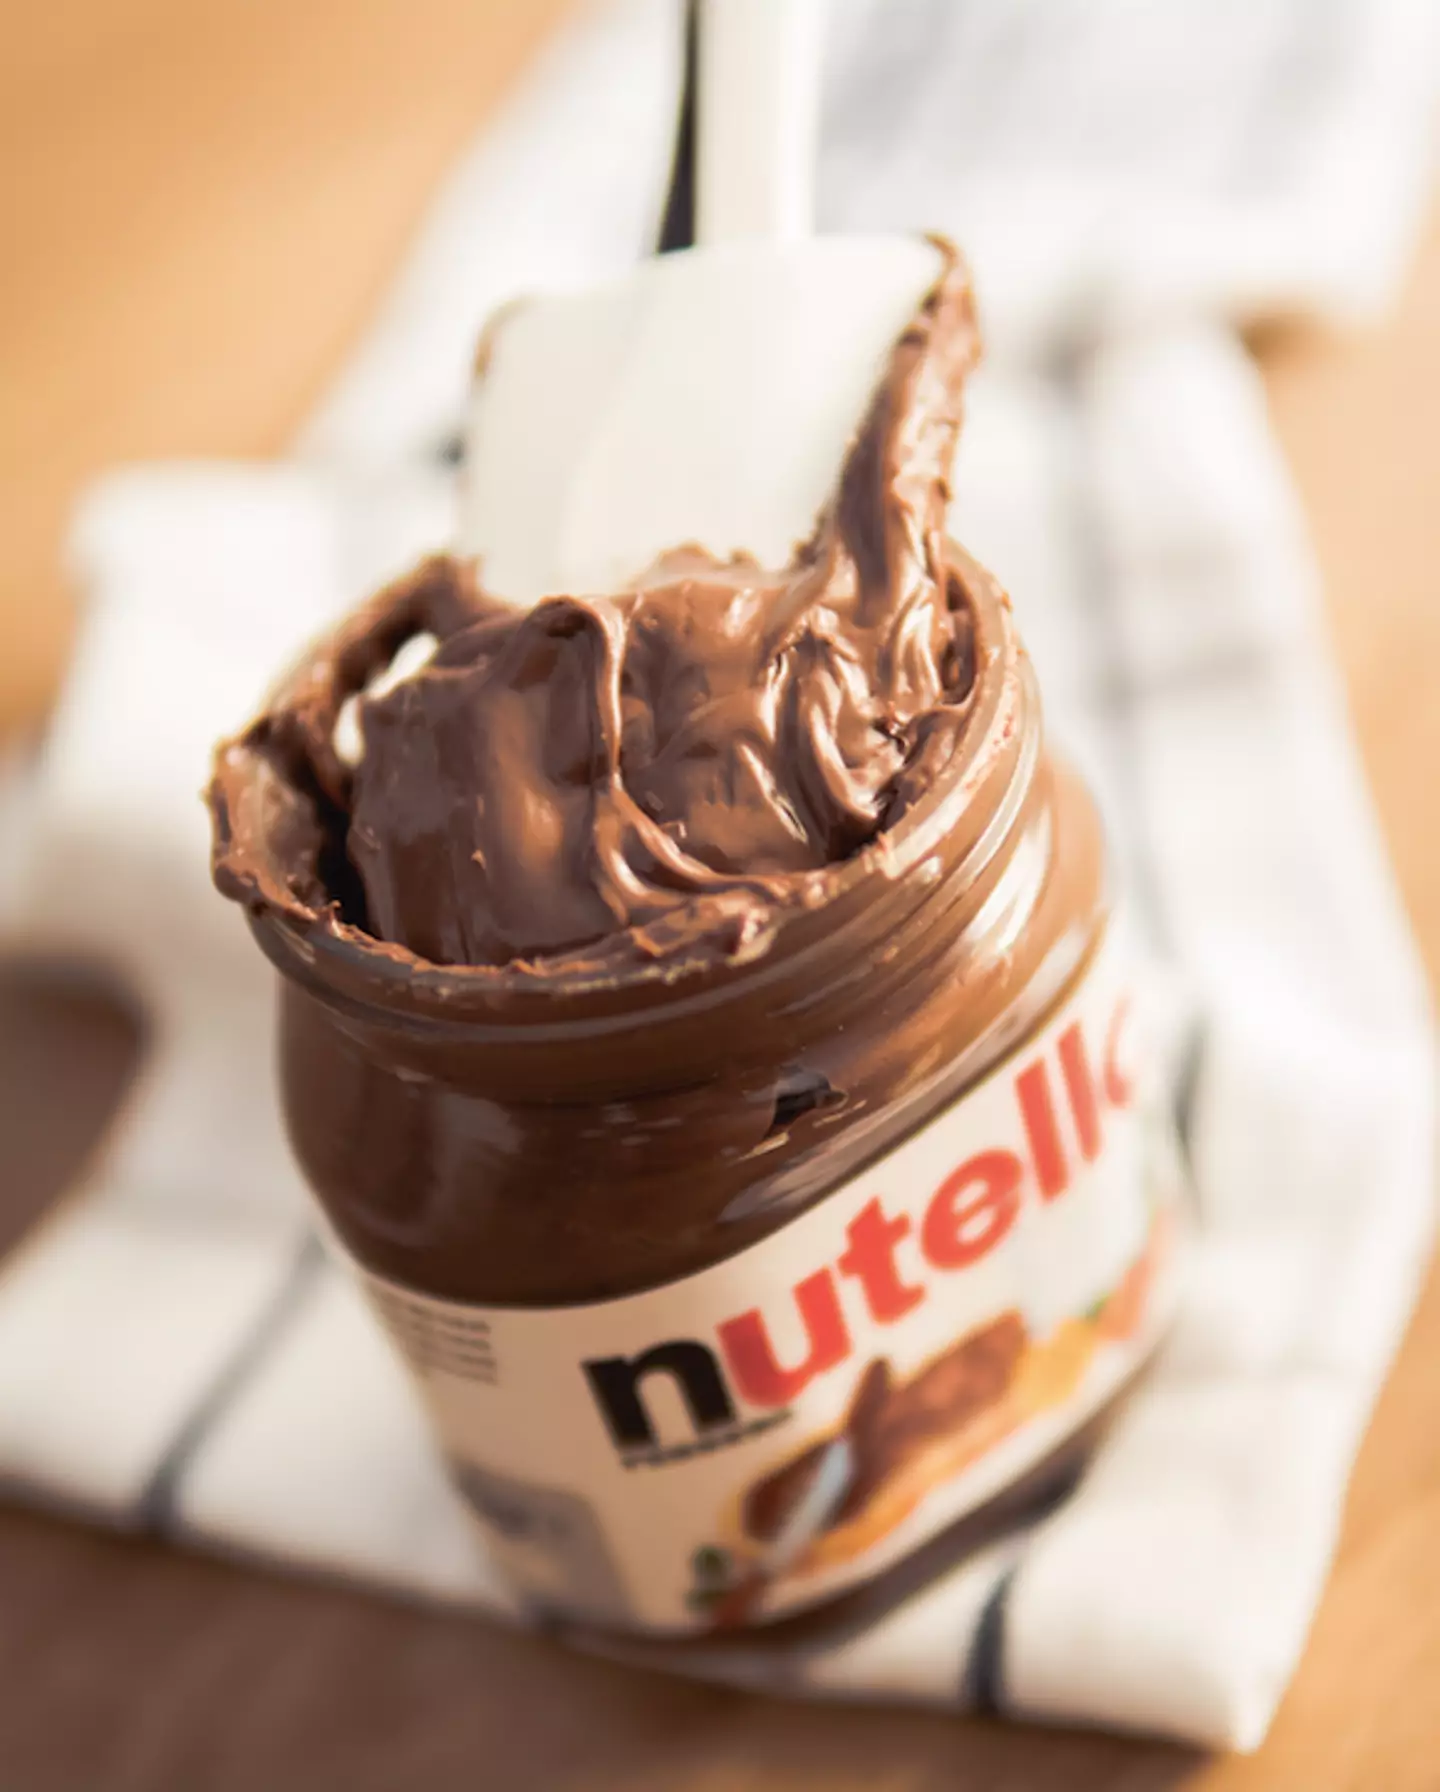 The best serving size of Nutella (